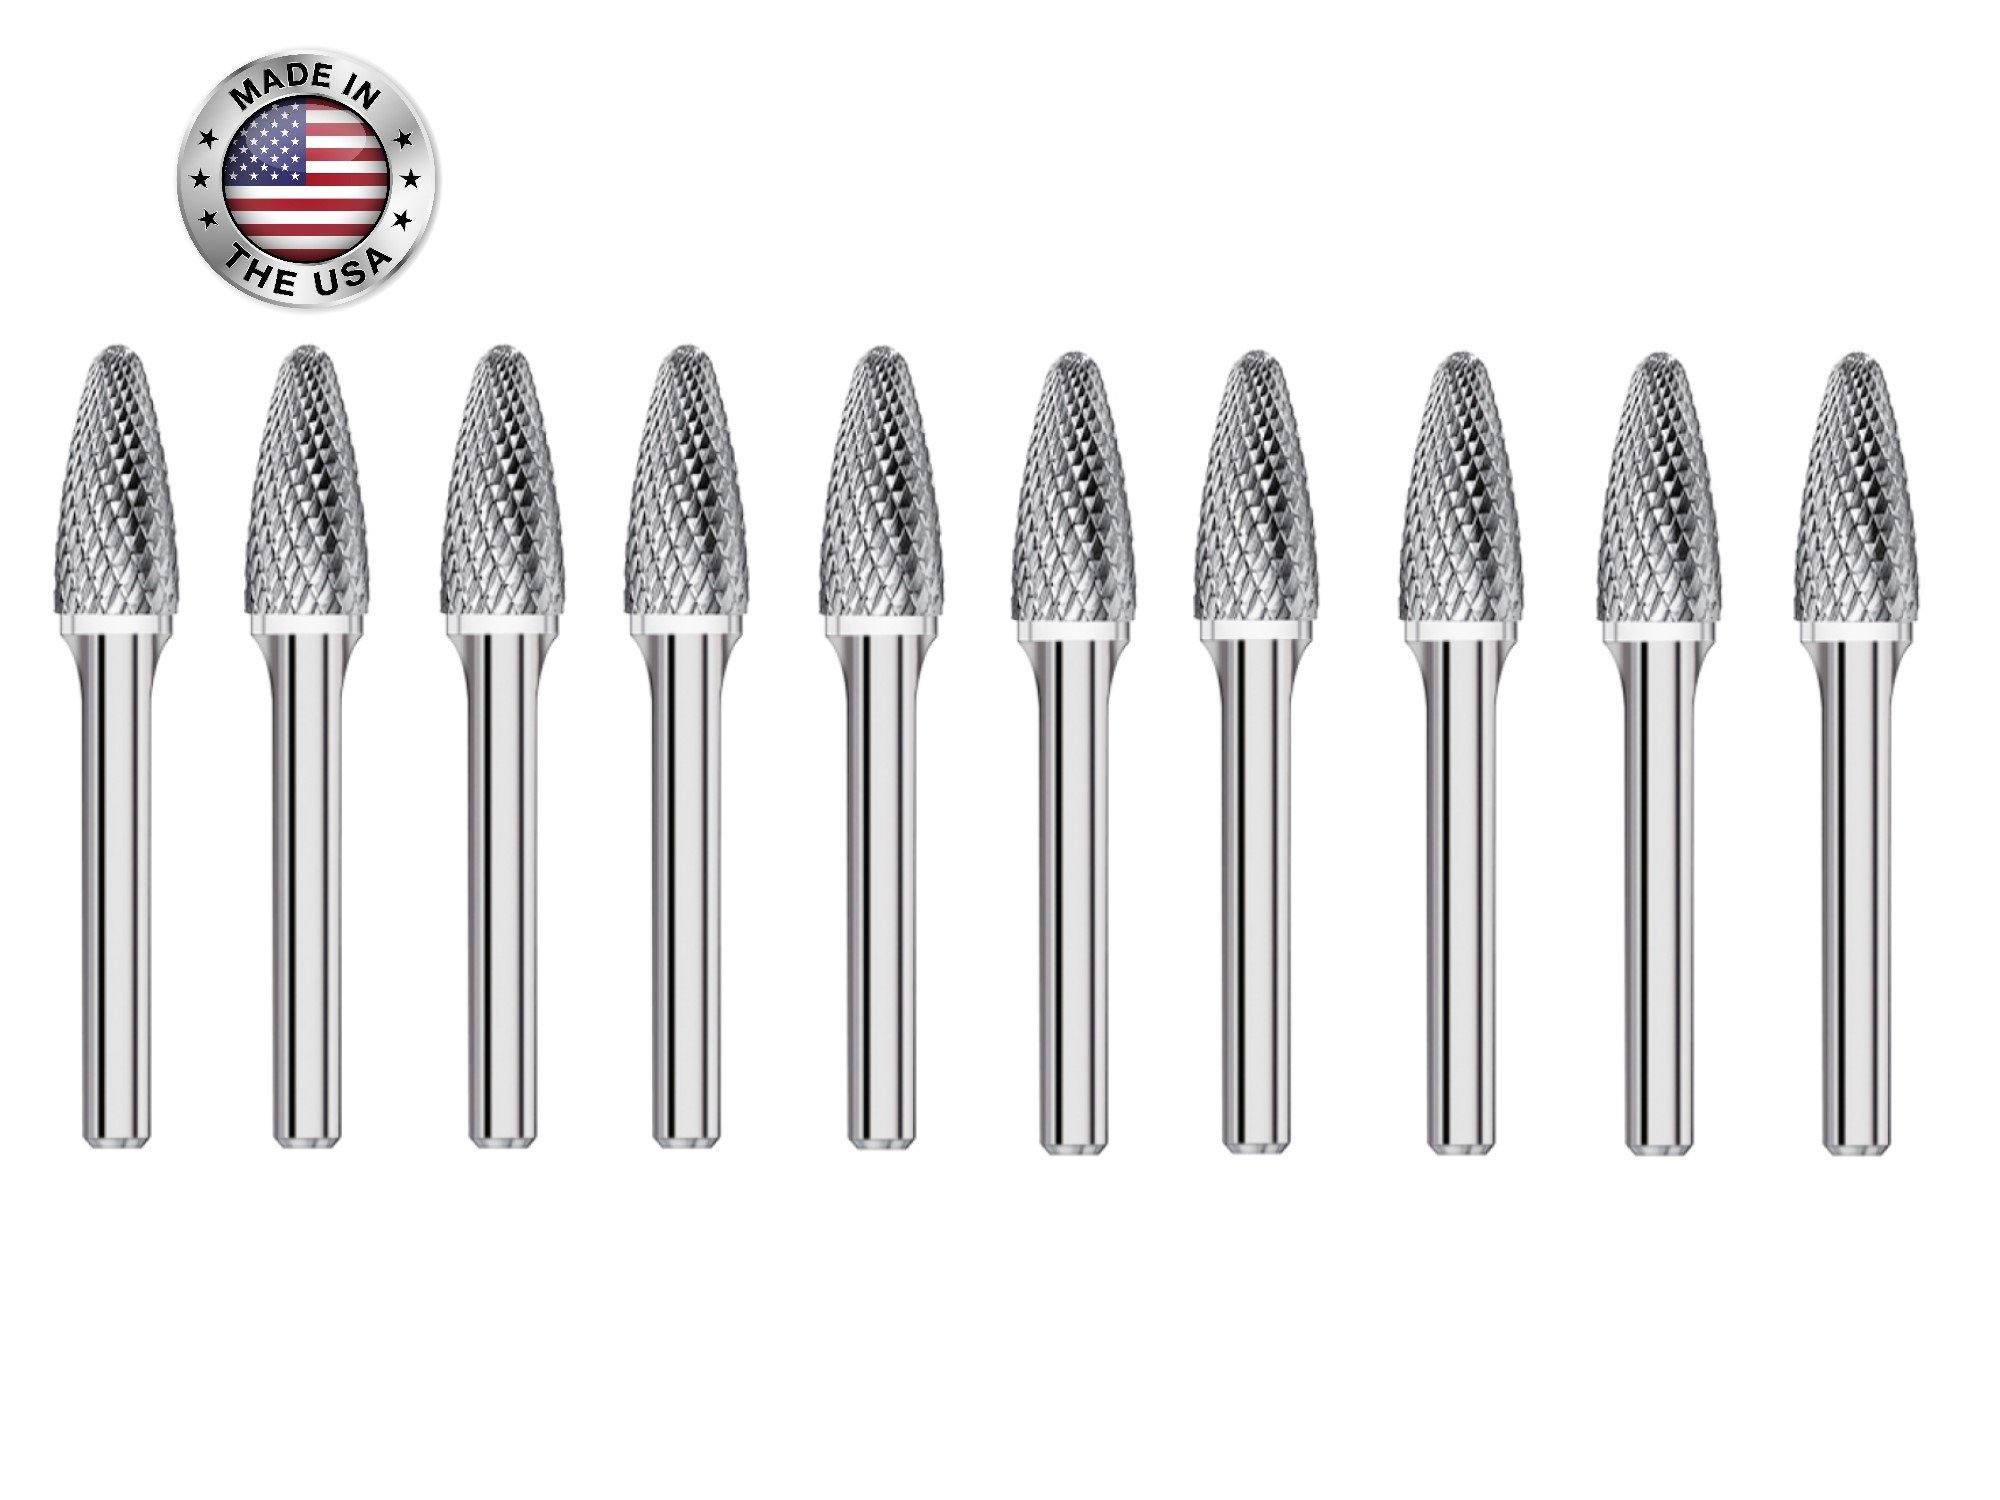 SF-61 Burr (10 Pack) 3/32" x 1/4" Cut Length x 1-1/2" OAL on 3/32" Shanks - The End Mill Store 